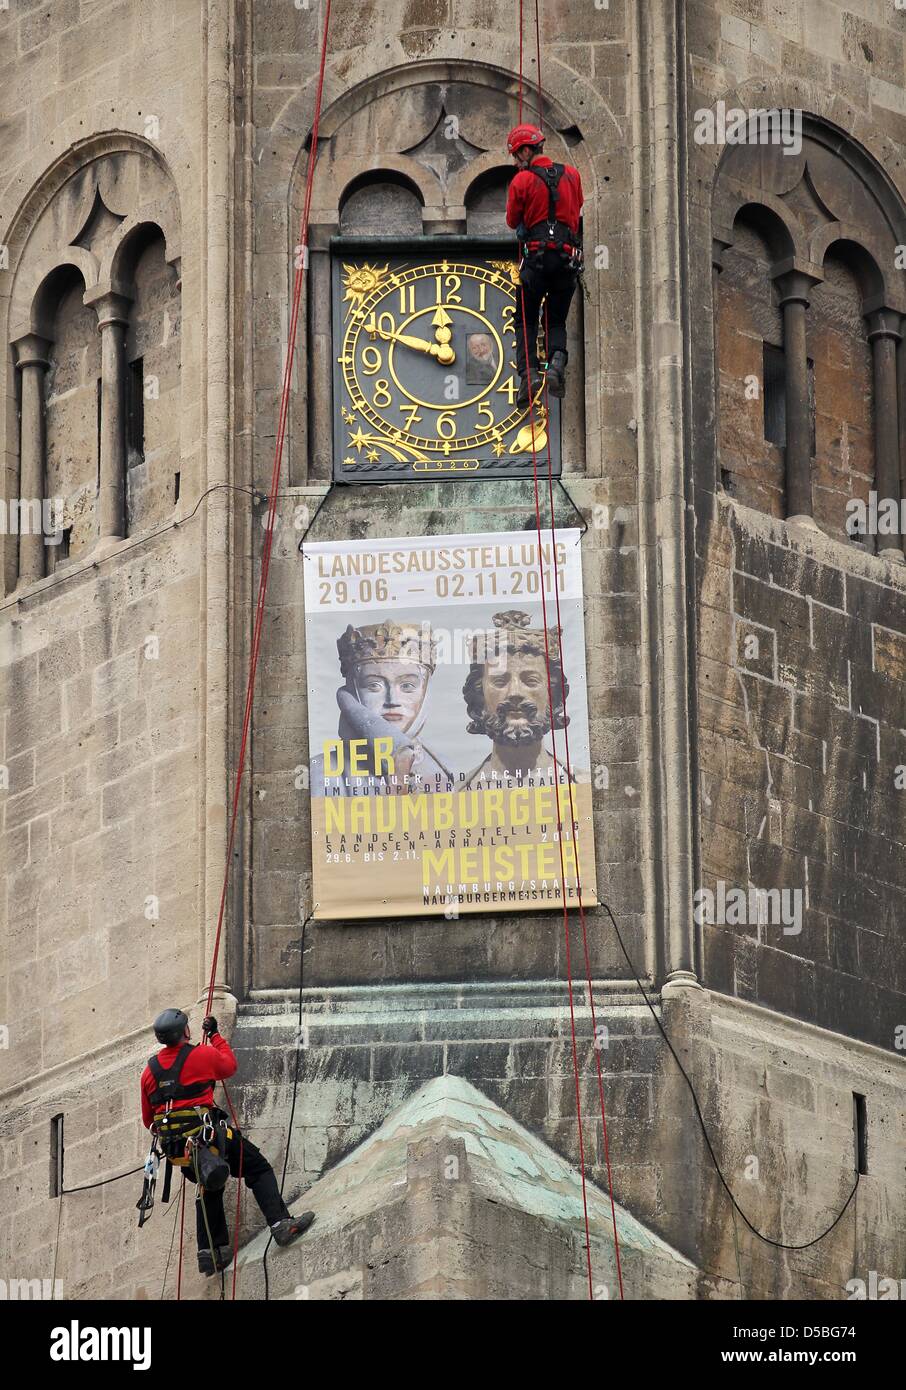 Two industrial climbers install a sign advertising the major regional exhibition of Saxony-Anhalt in 2011 at a tower of the dome in Naumburg, Germany, 02 September 2010. The sign measures three metres. The exhibition named 'The master from Naumburg - sculptor and architect in Europe's league of cathedrals' will be open from 29 June until 02 November 2011 in Naumburg. Photo: Jan Woi Stock Photo